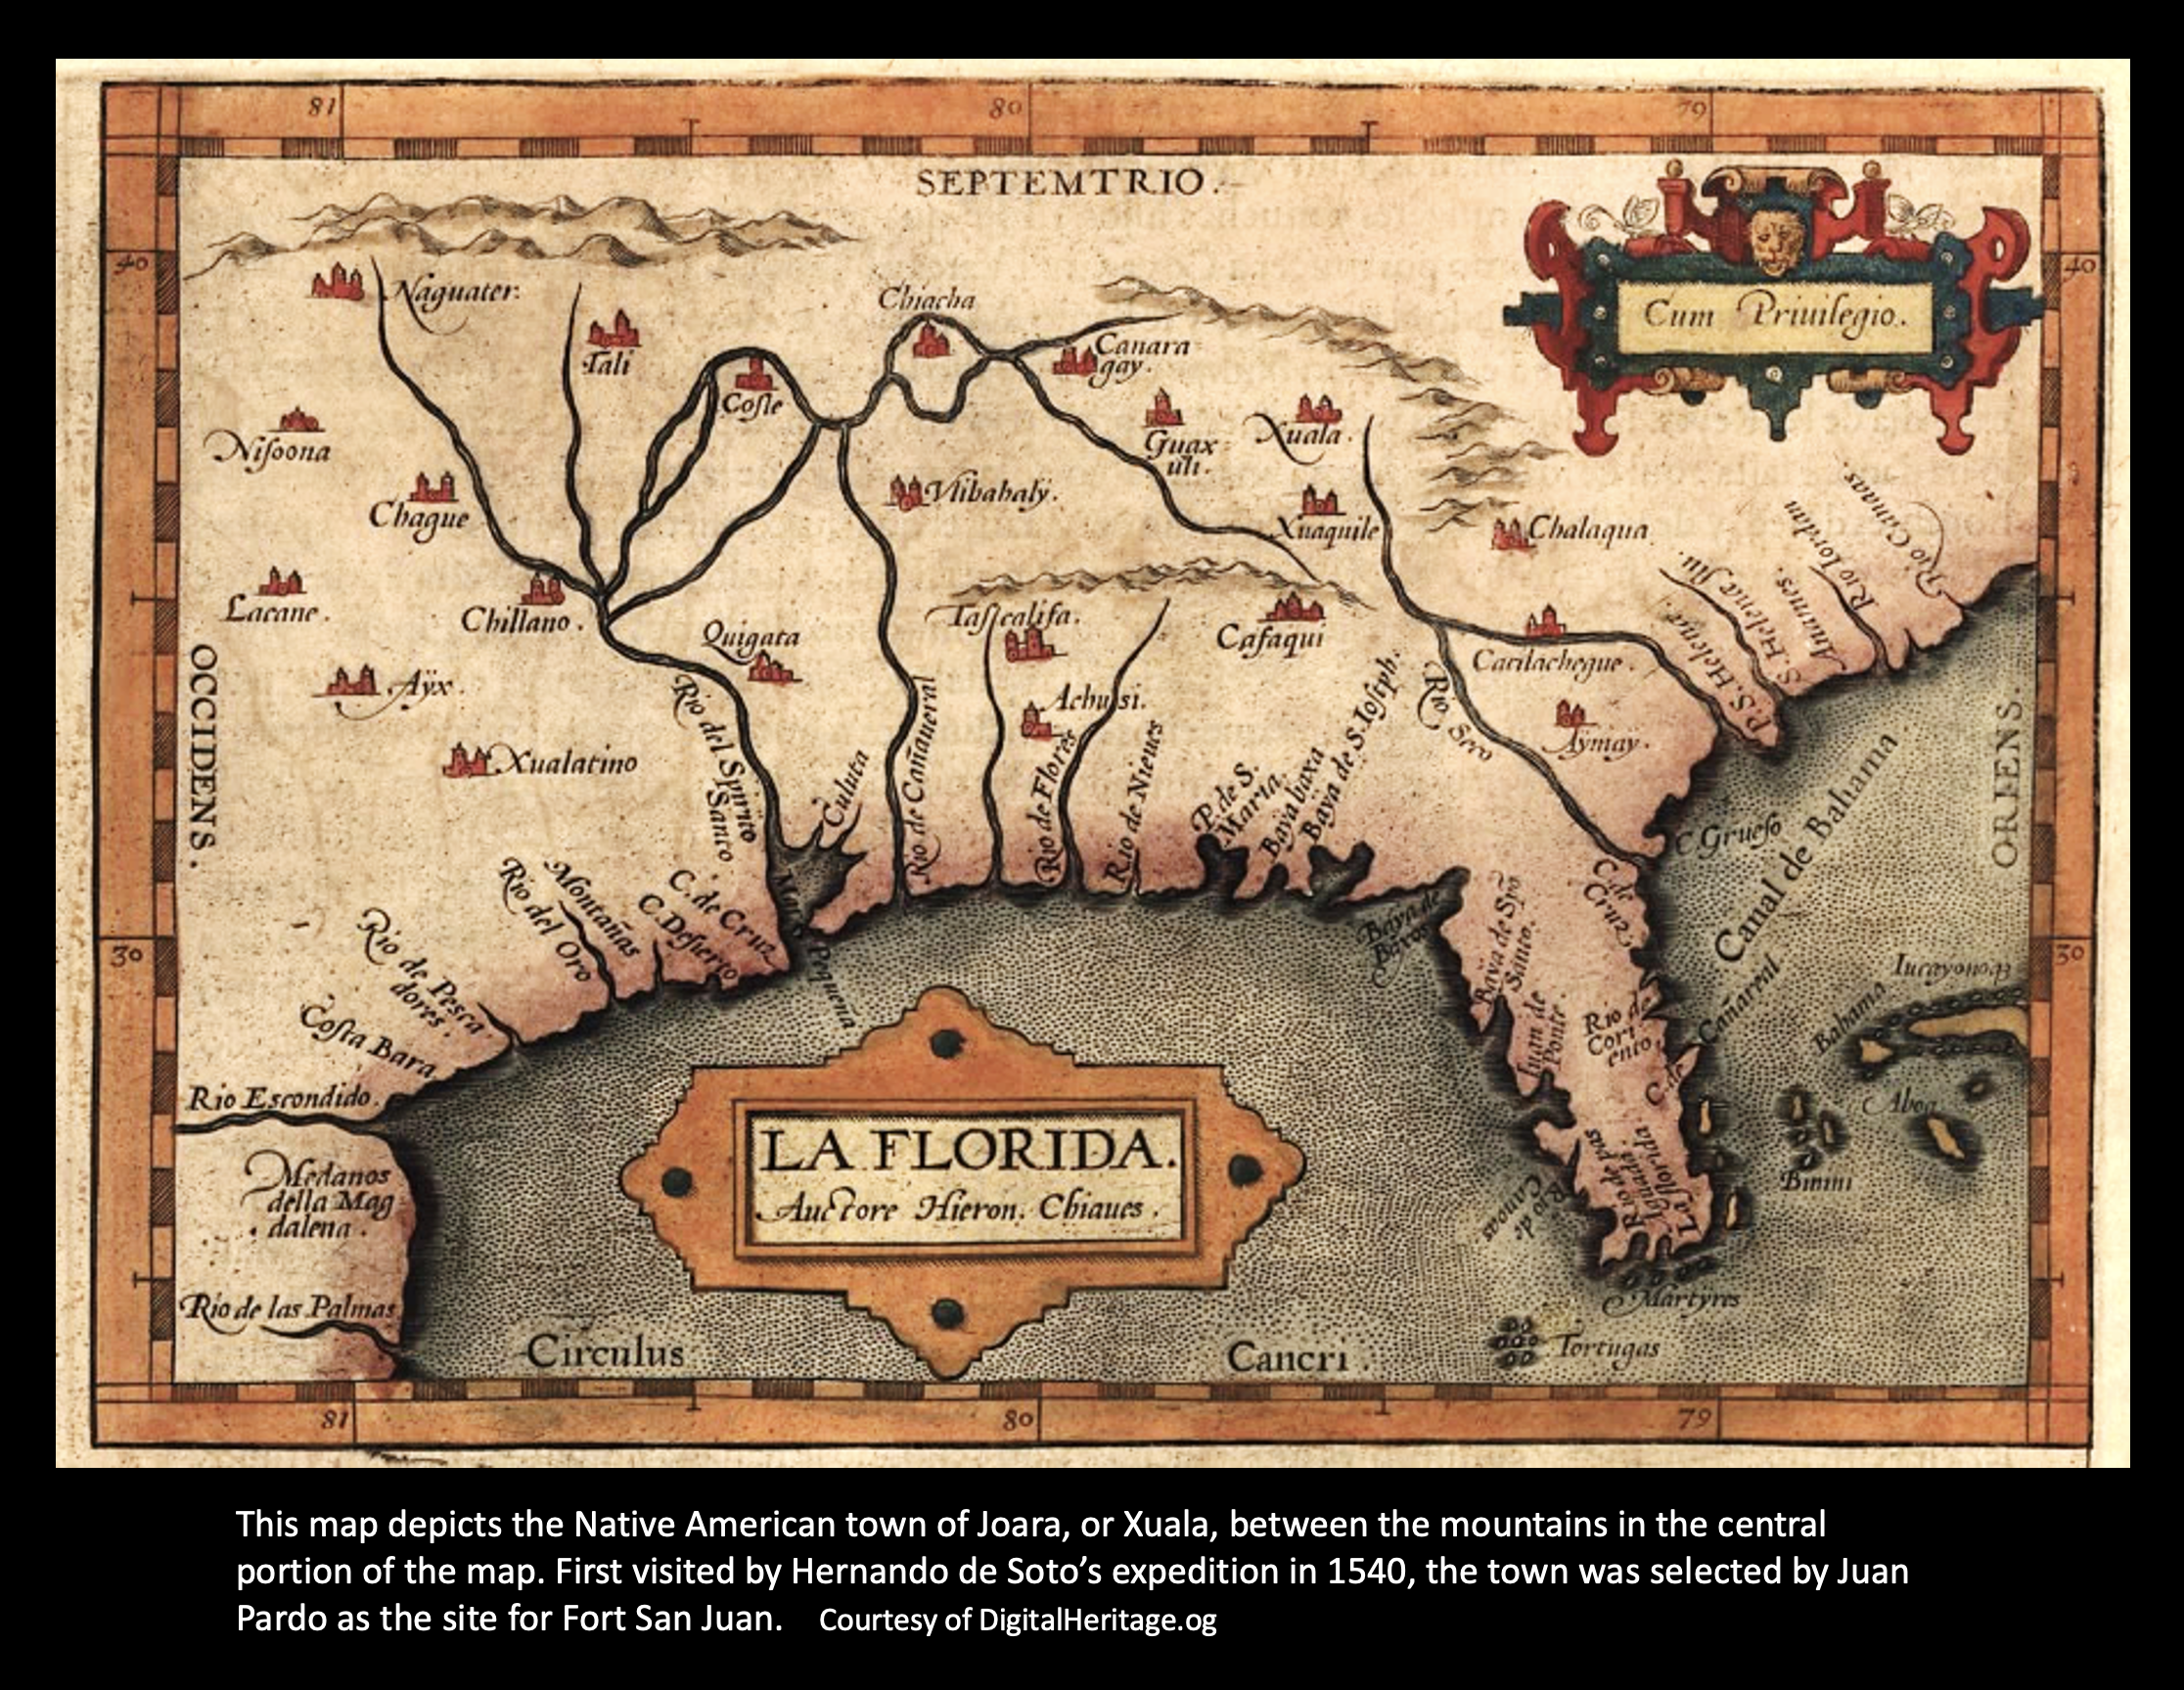 Scott# 327 MAP LOUISIANA PURCHASE, USED, VERY NICELY CENTERED